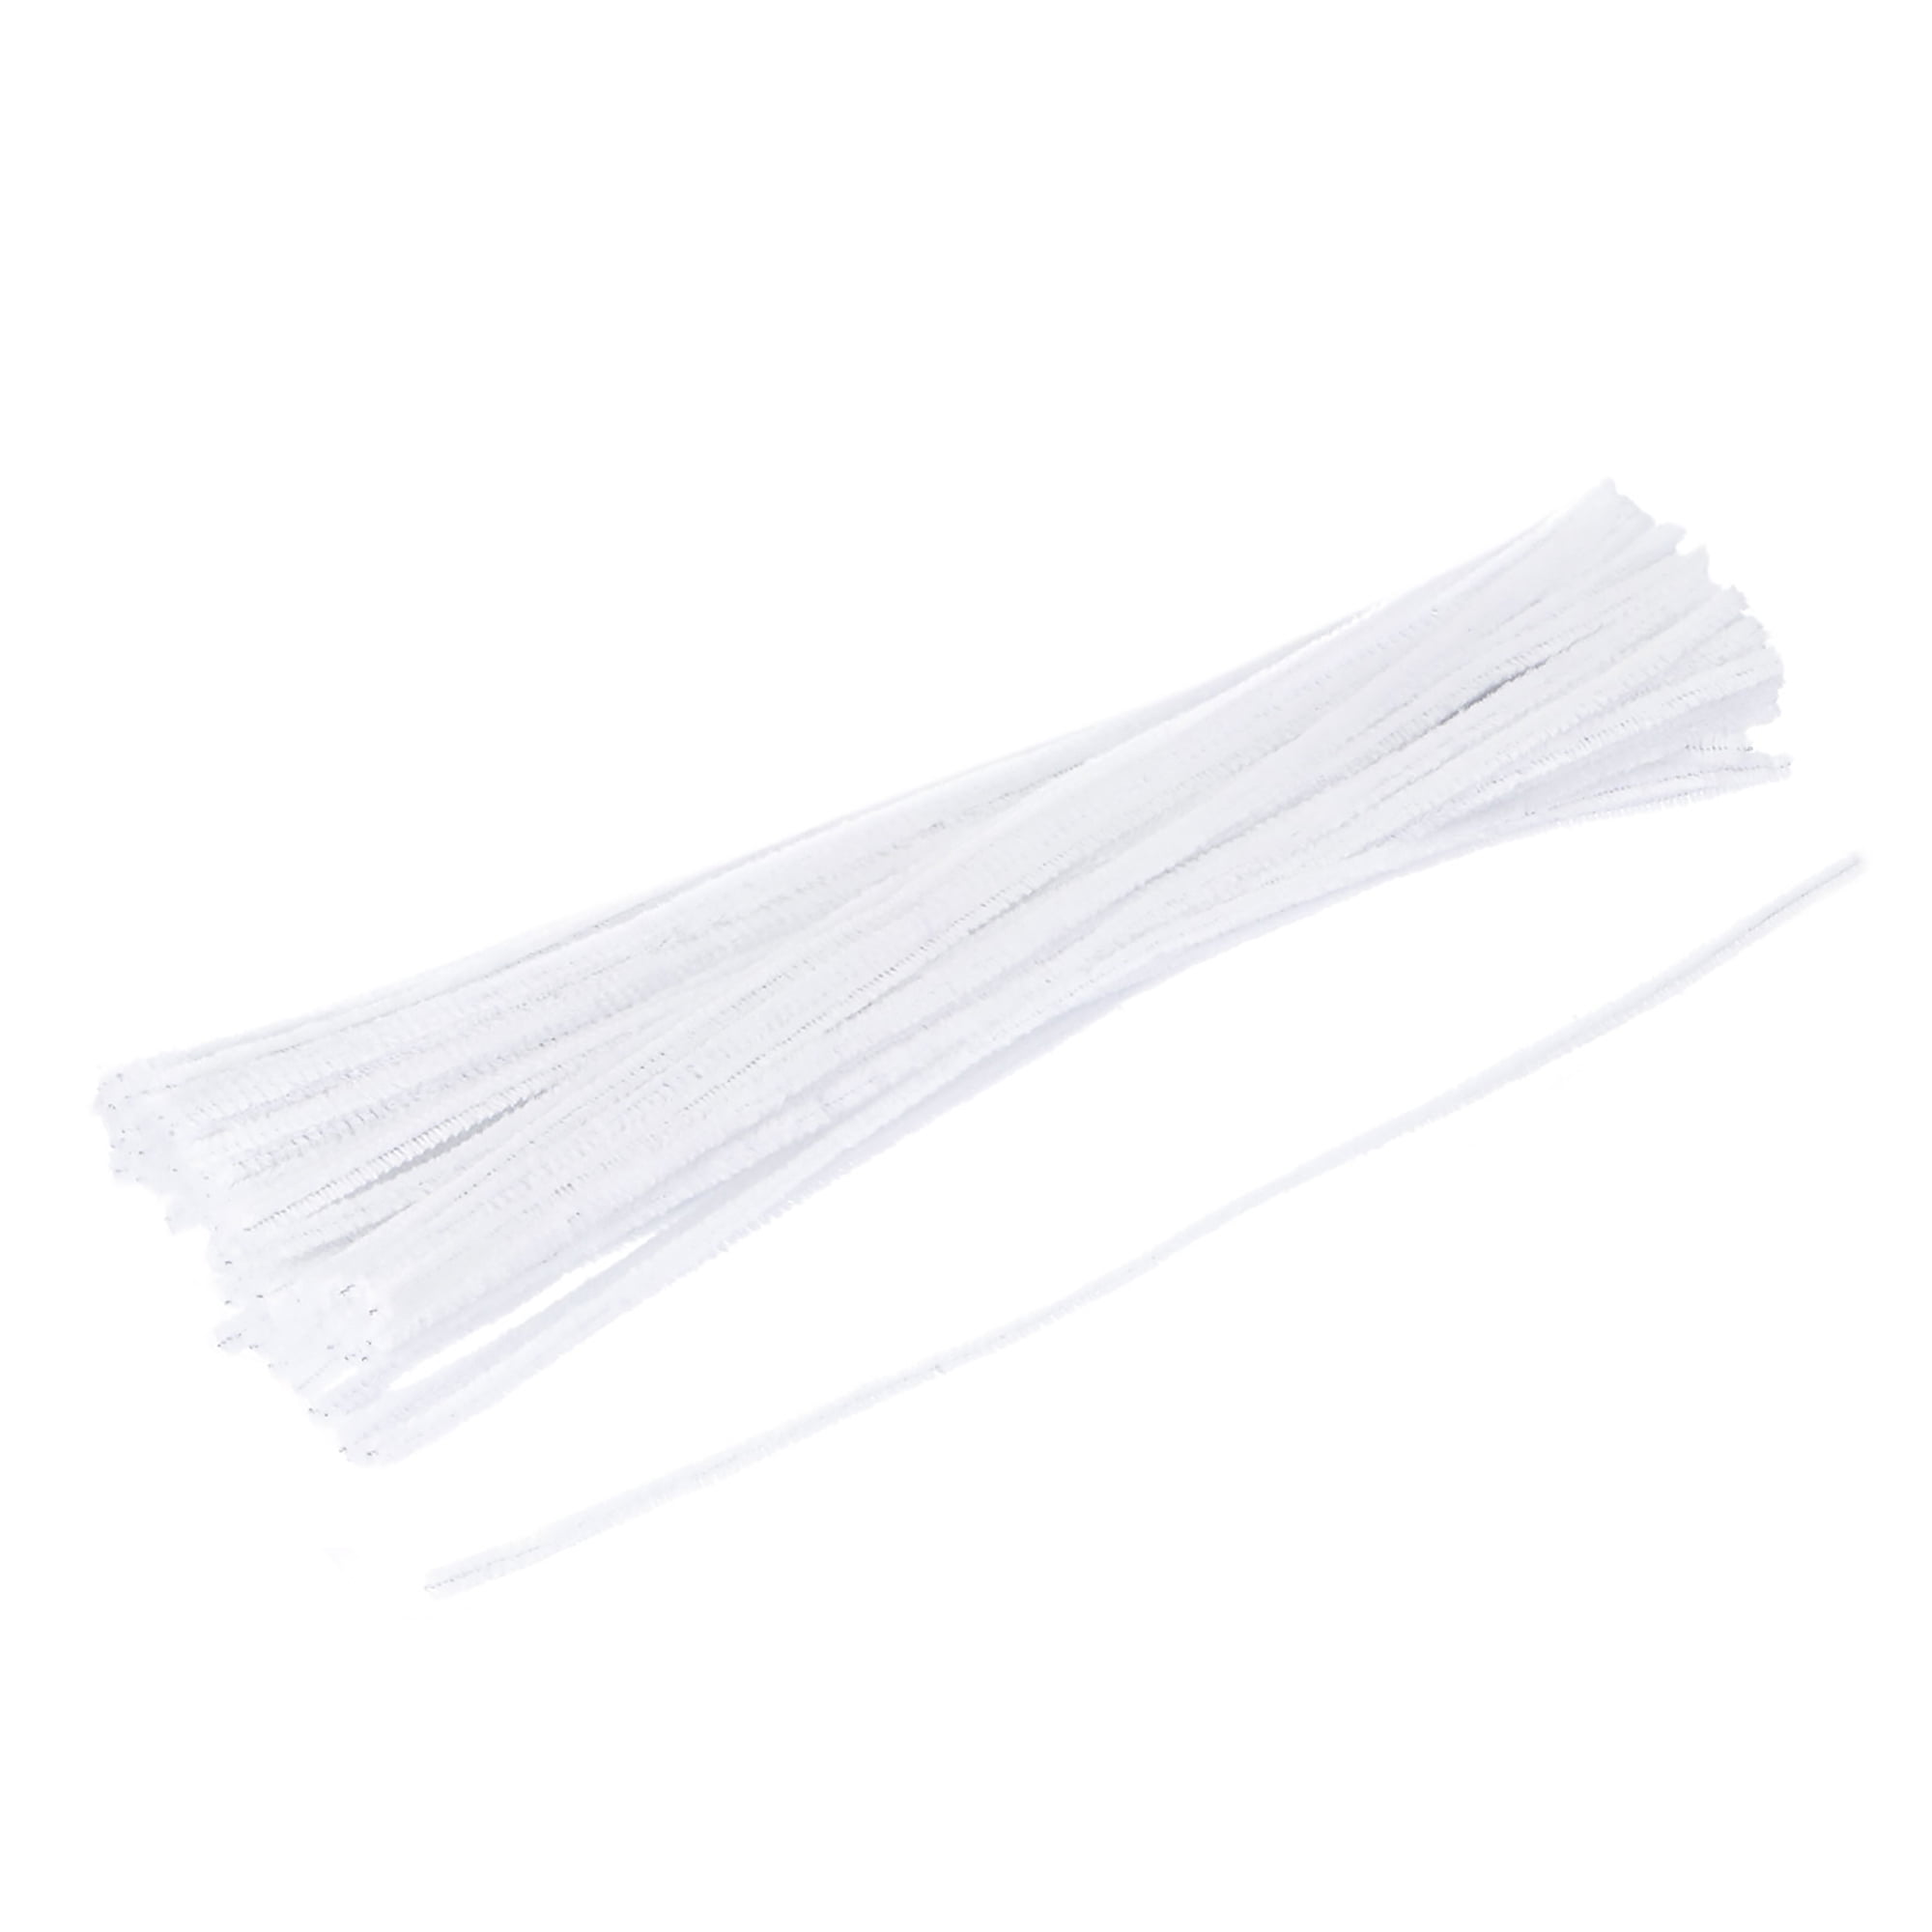 Chenille Stems, Pipe Cleaner, 12-Inch (30-cm), 1000-pc, White